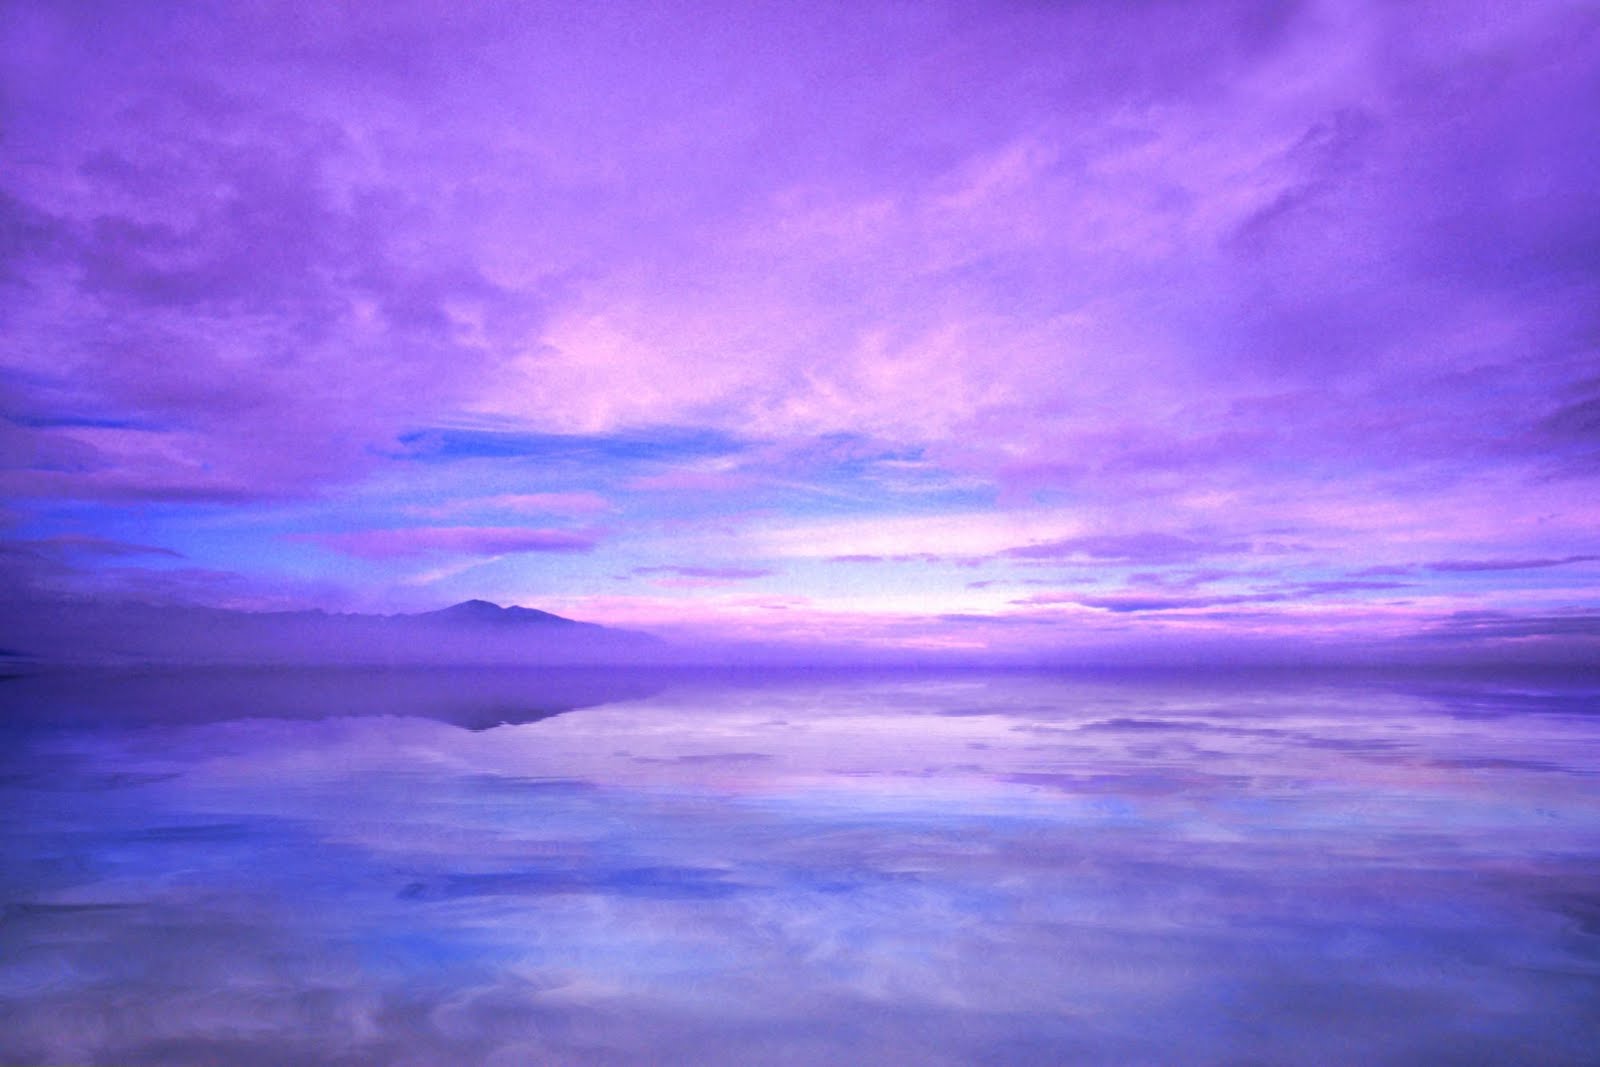 most cool wallpapers,sky,violet,purple,blue,sea